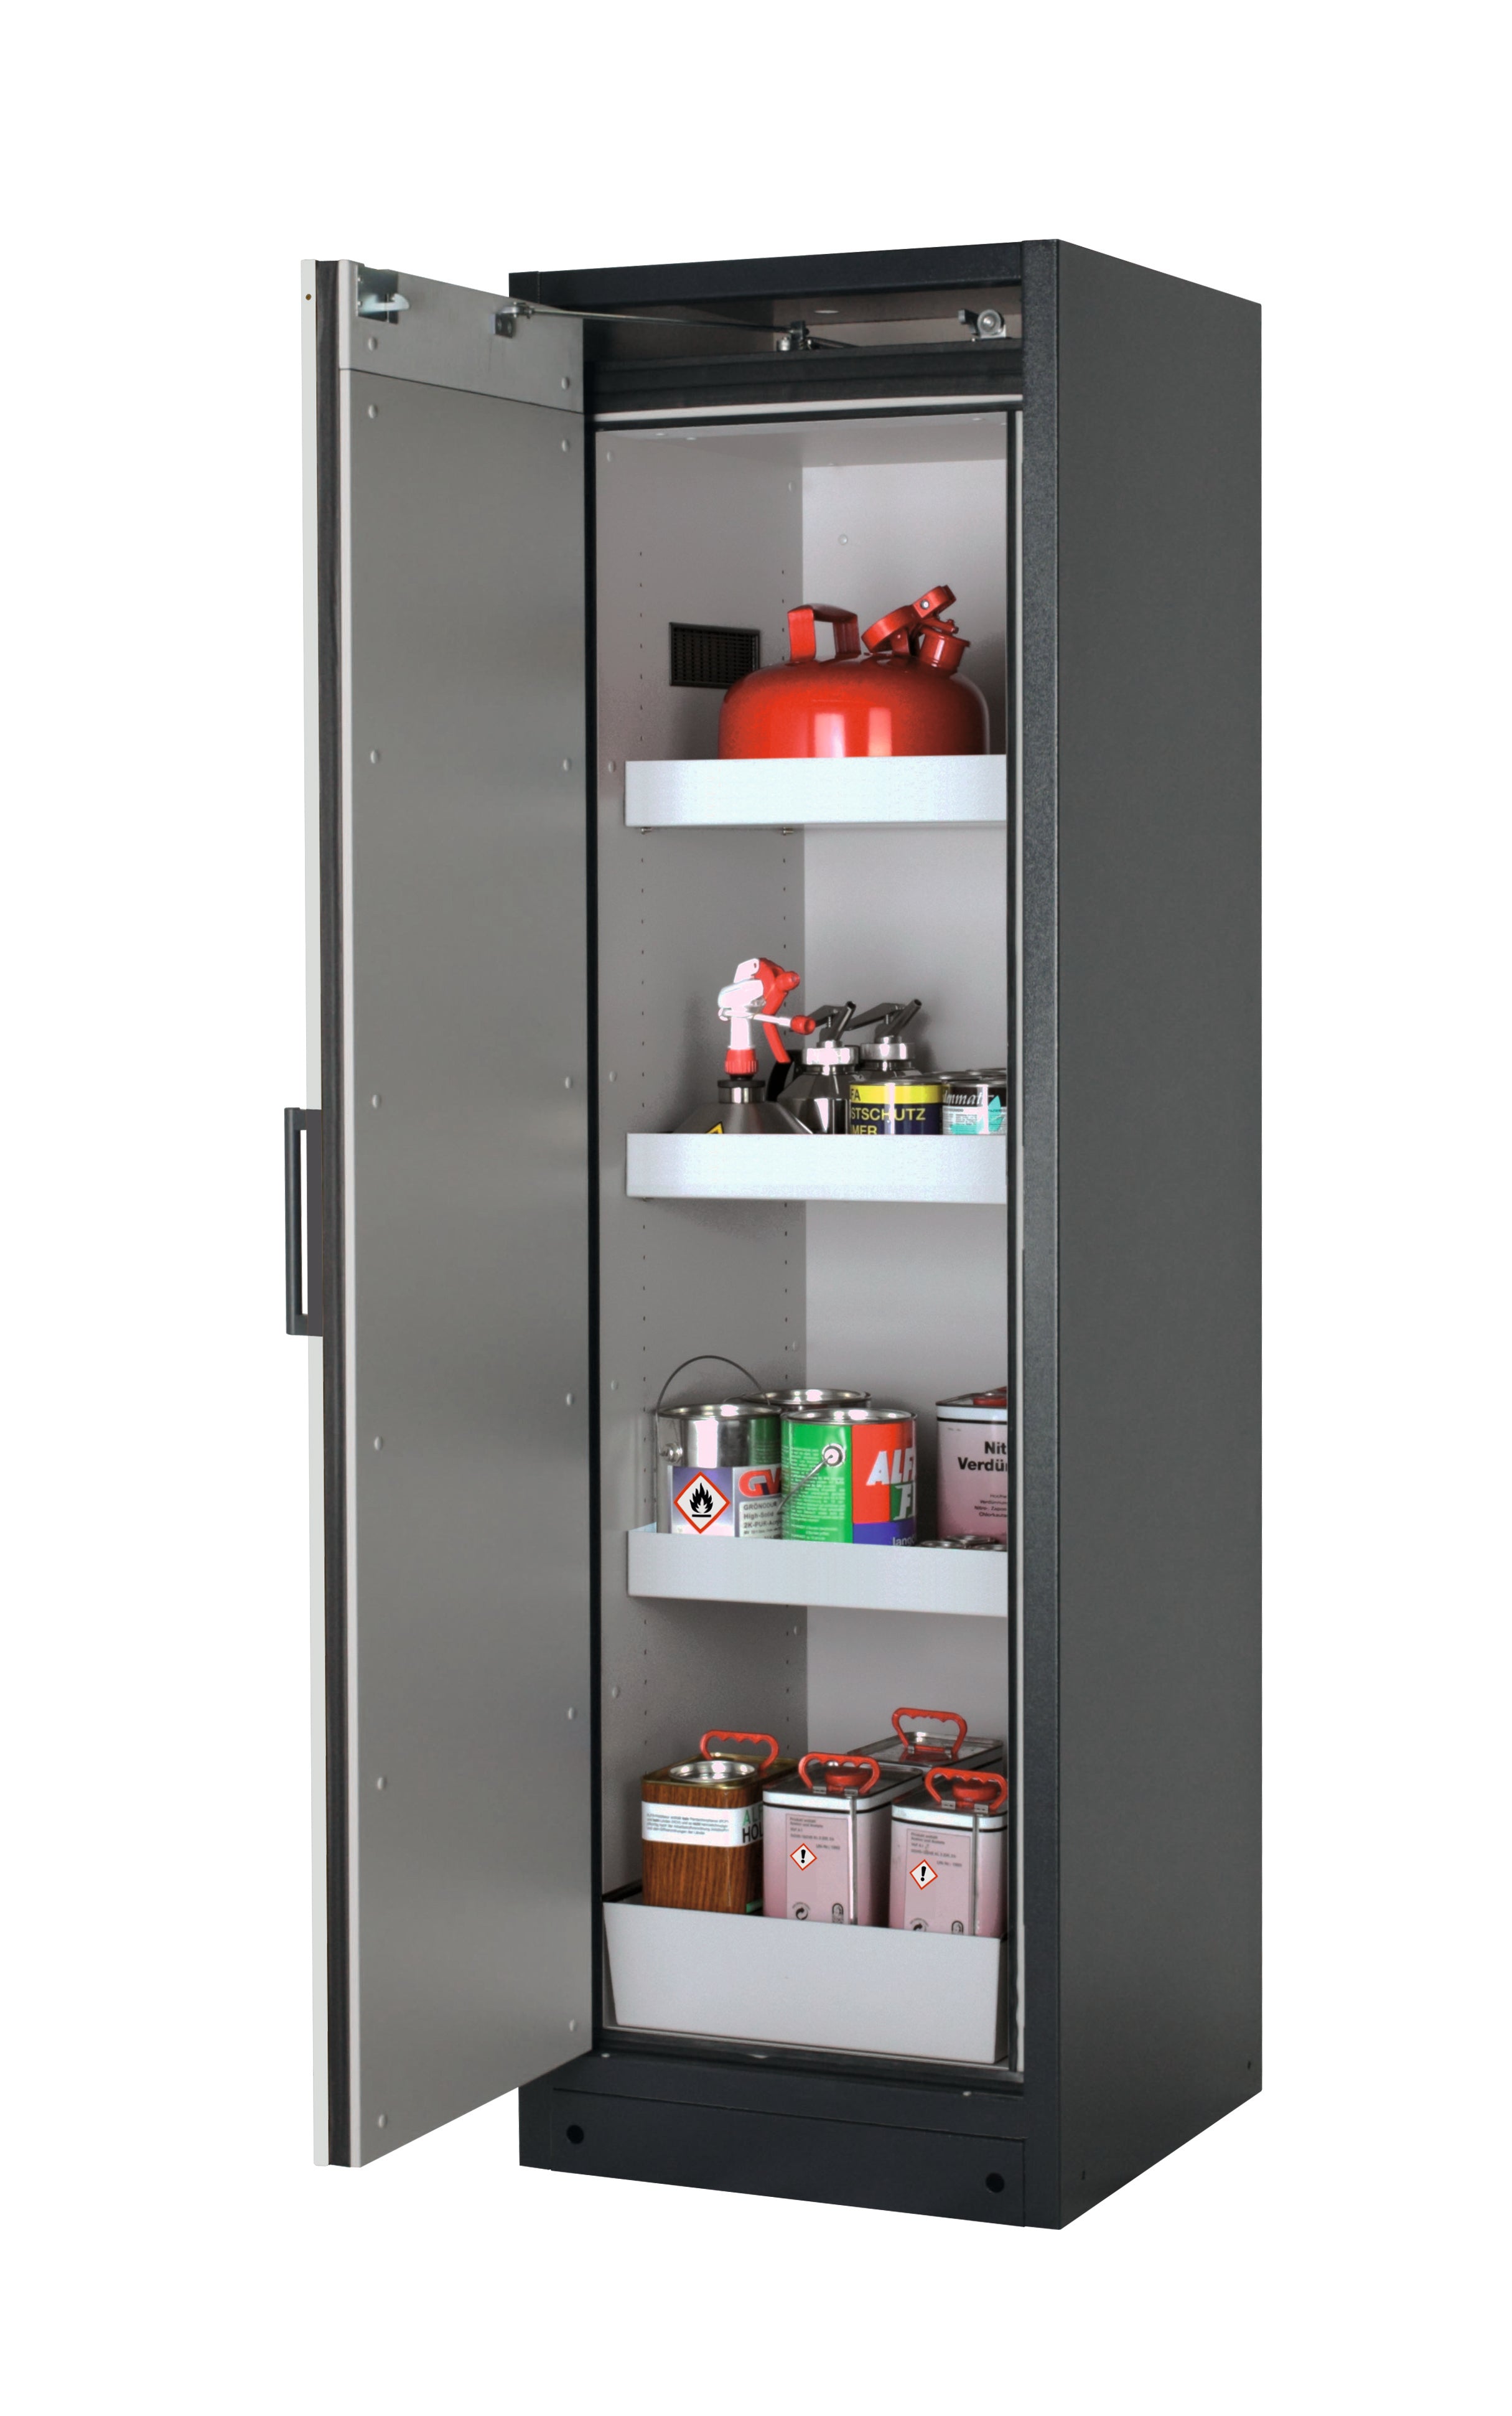 Type 90 safety storage cabinet Q-CLASSIC-90 model Q90.195.060 in light grey RAL 7035 with 3x tray shelf (standard) (sheet steel),